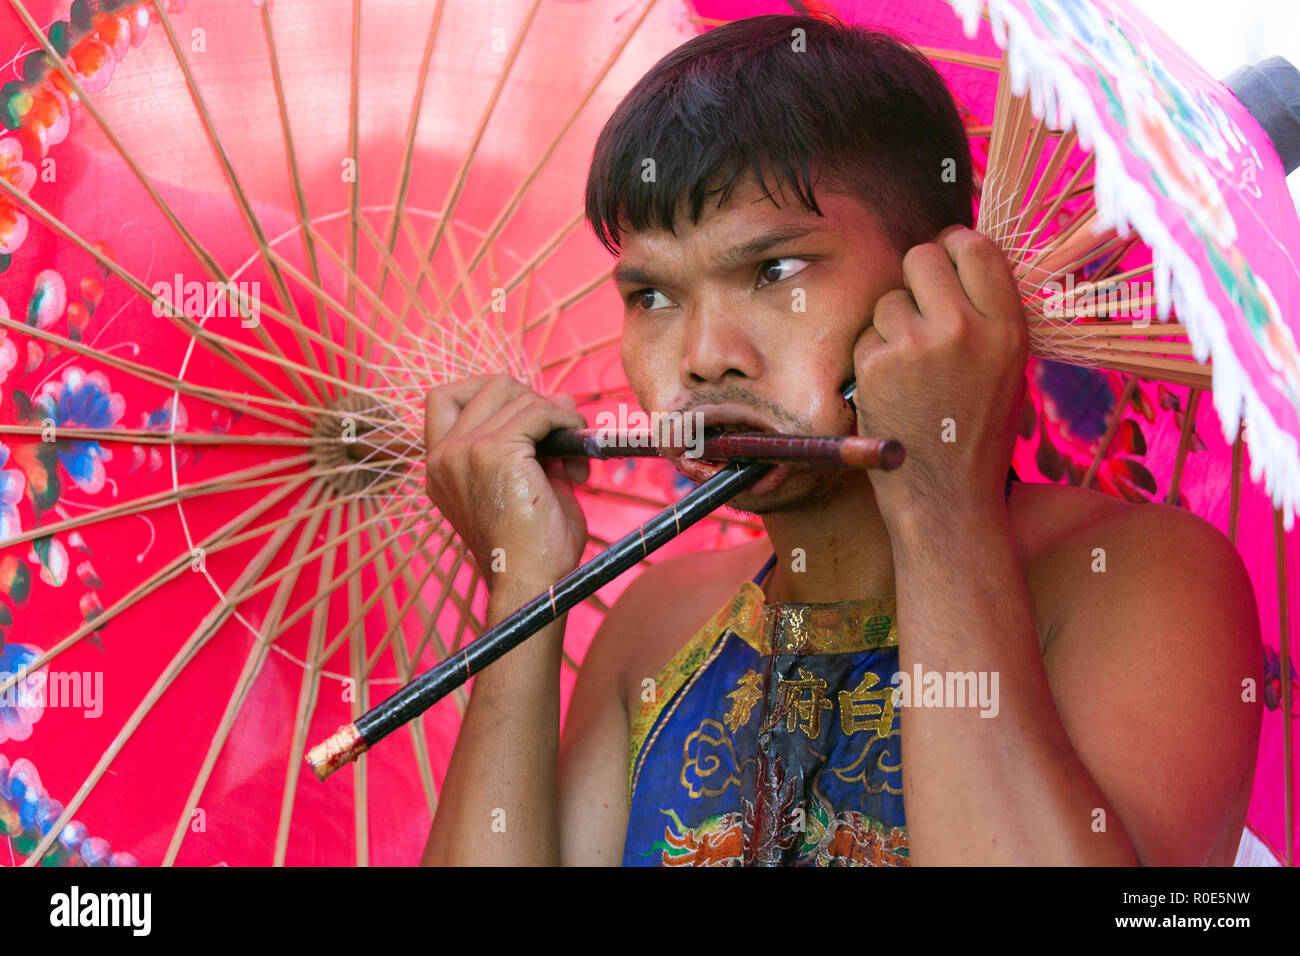 Phuket Town, THAILAND, October 07, 2016 : Devotee extreme piercing street procession during the Taoist vegetarian festival of the Nine Emperor Gods in Stock Photo